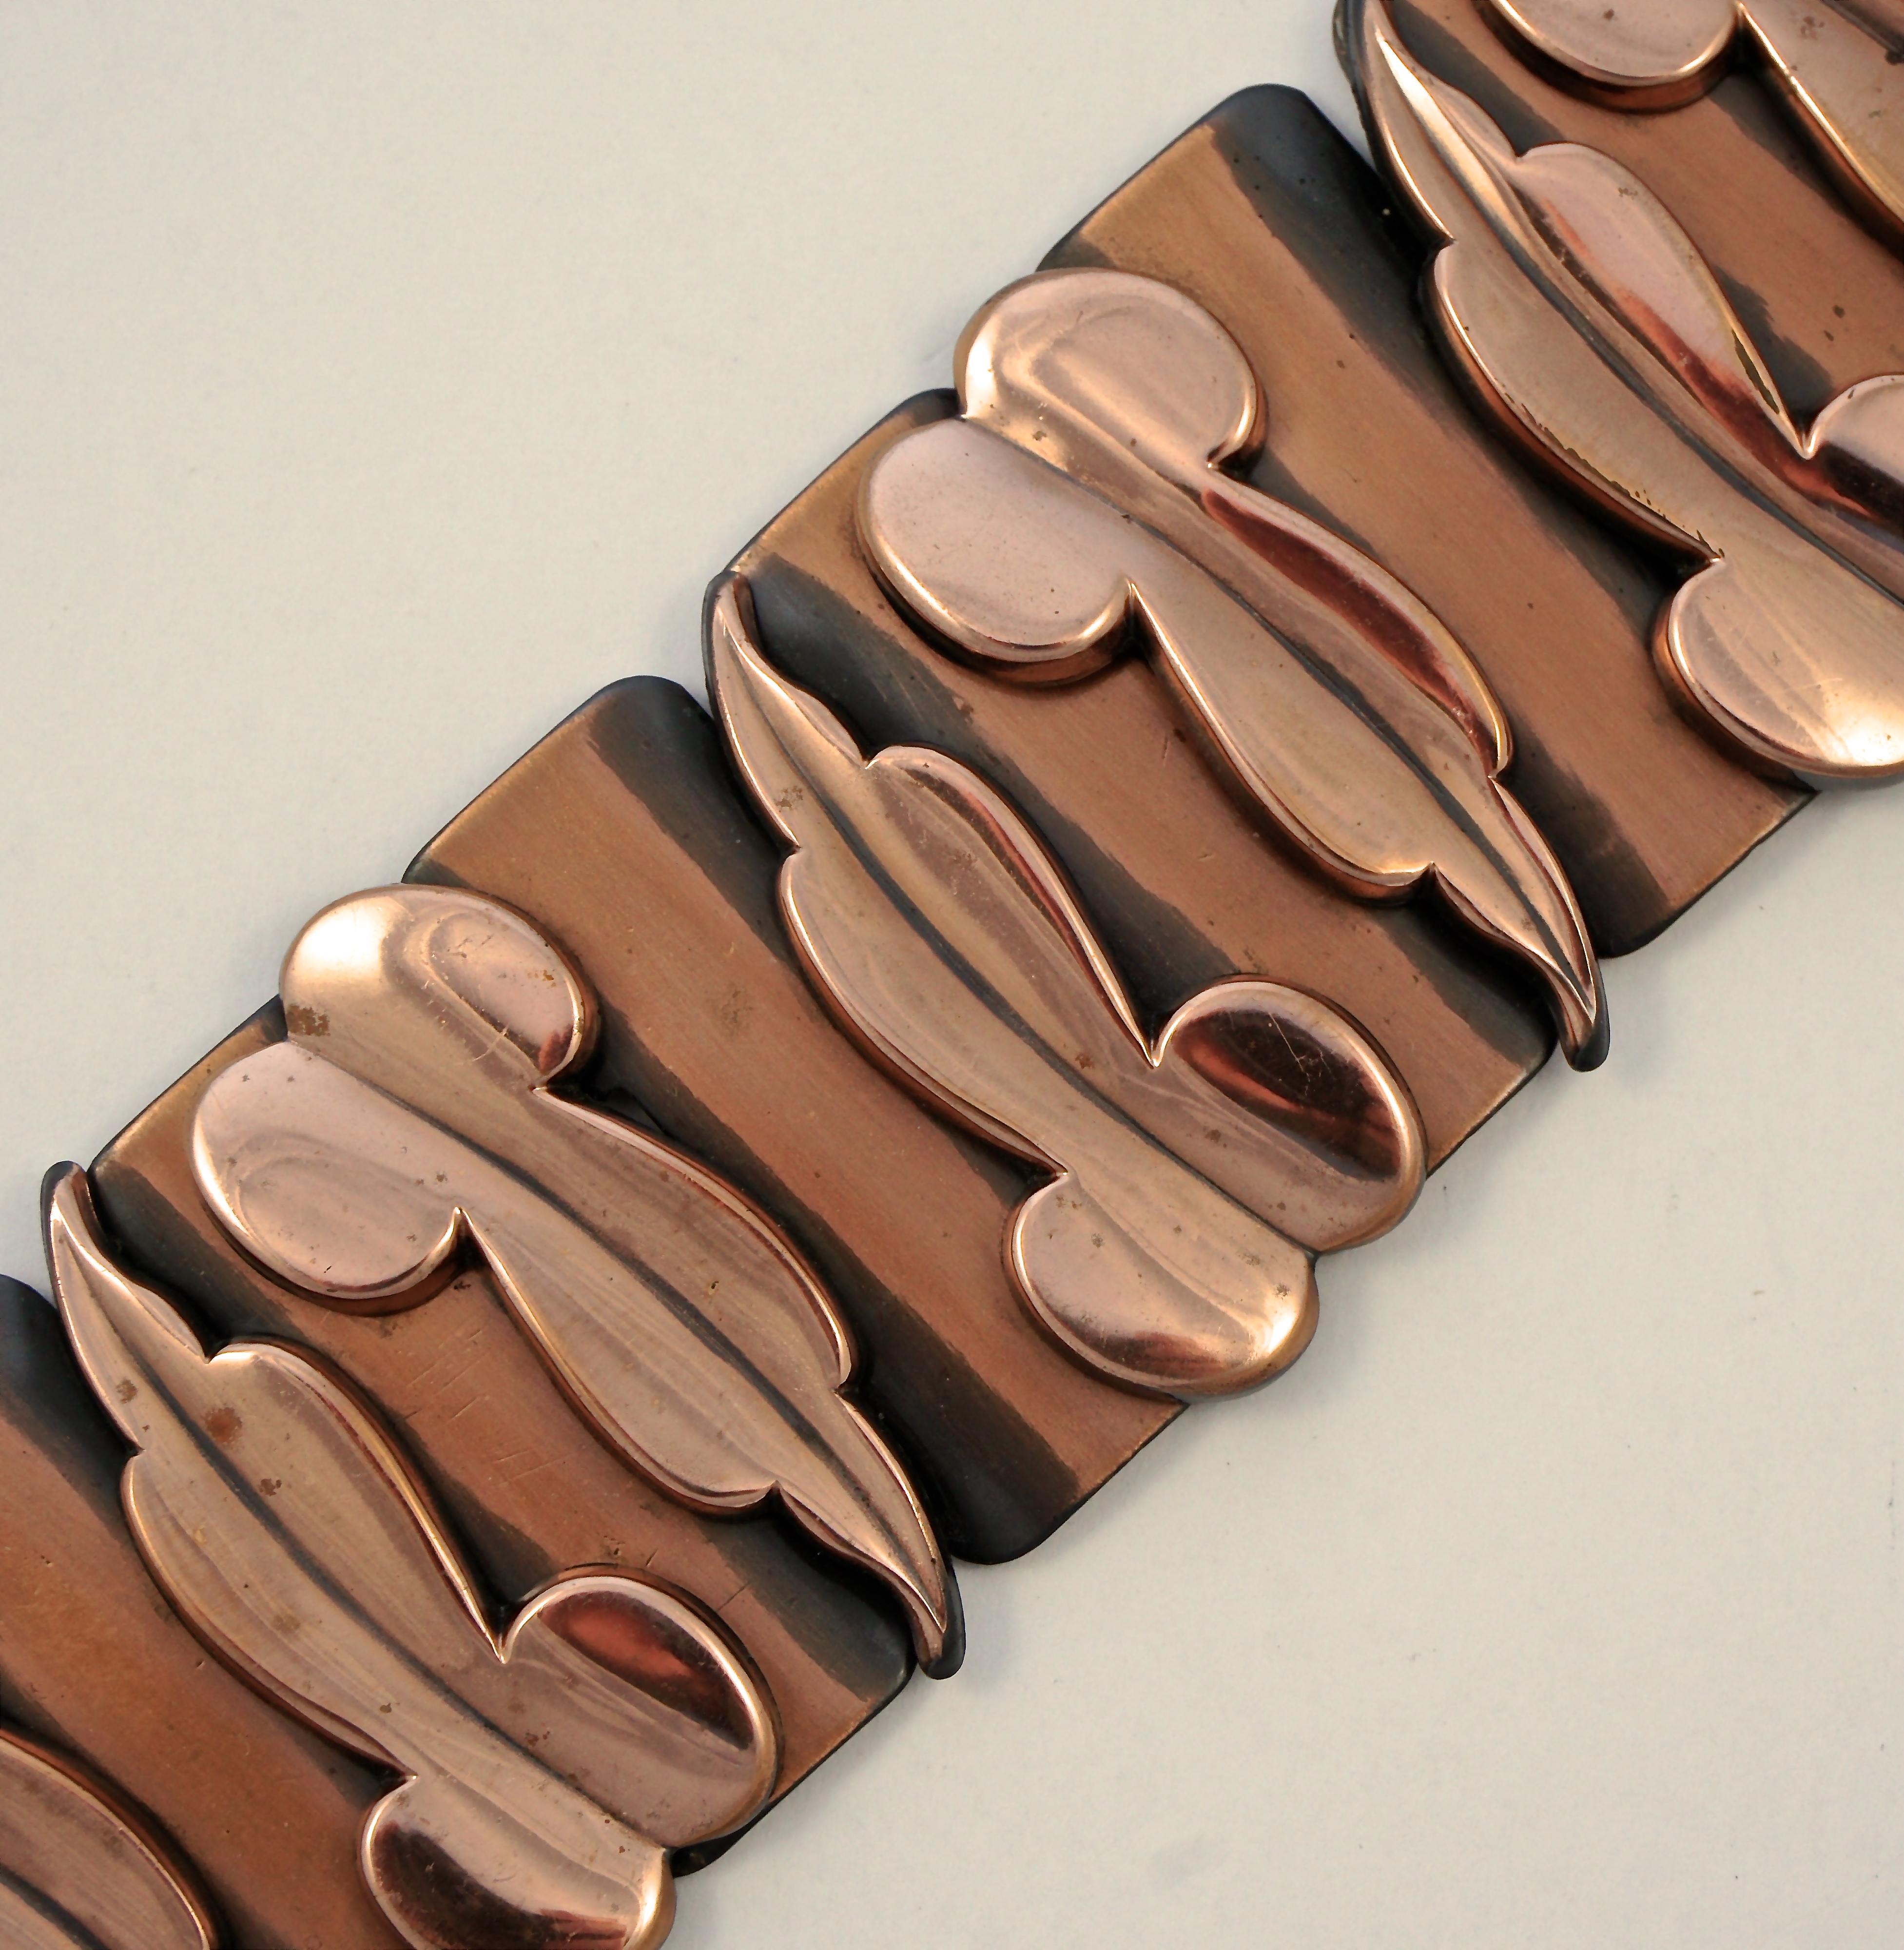 Renoir copper mid century wide link bracelet, featuring a beautiful abstract polished leaf design set in relief to the anodized links. Measuring length 17.78cm / 7 inches by width 4.1cm / 1.6 inches. The fold over clasp works well. The bracelet has